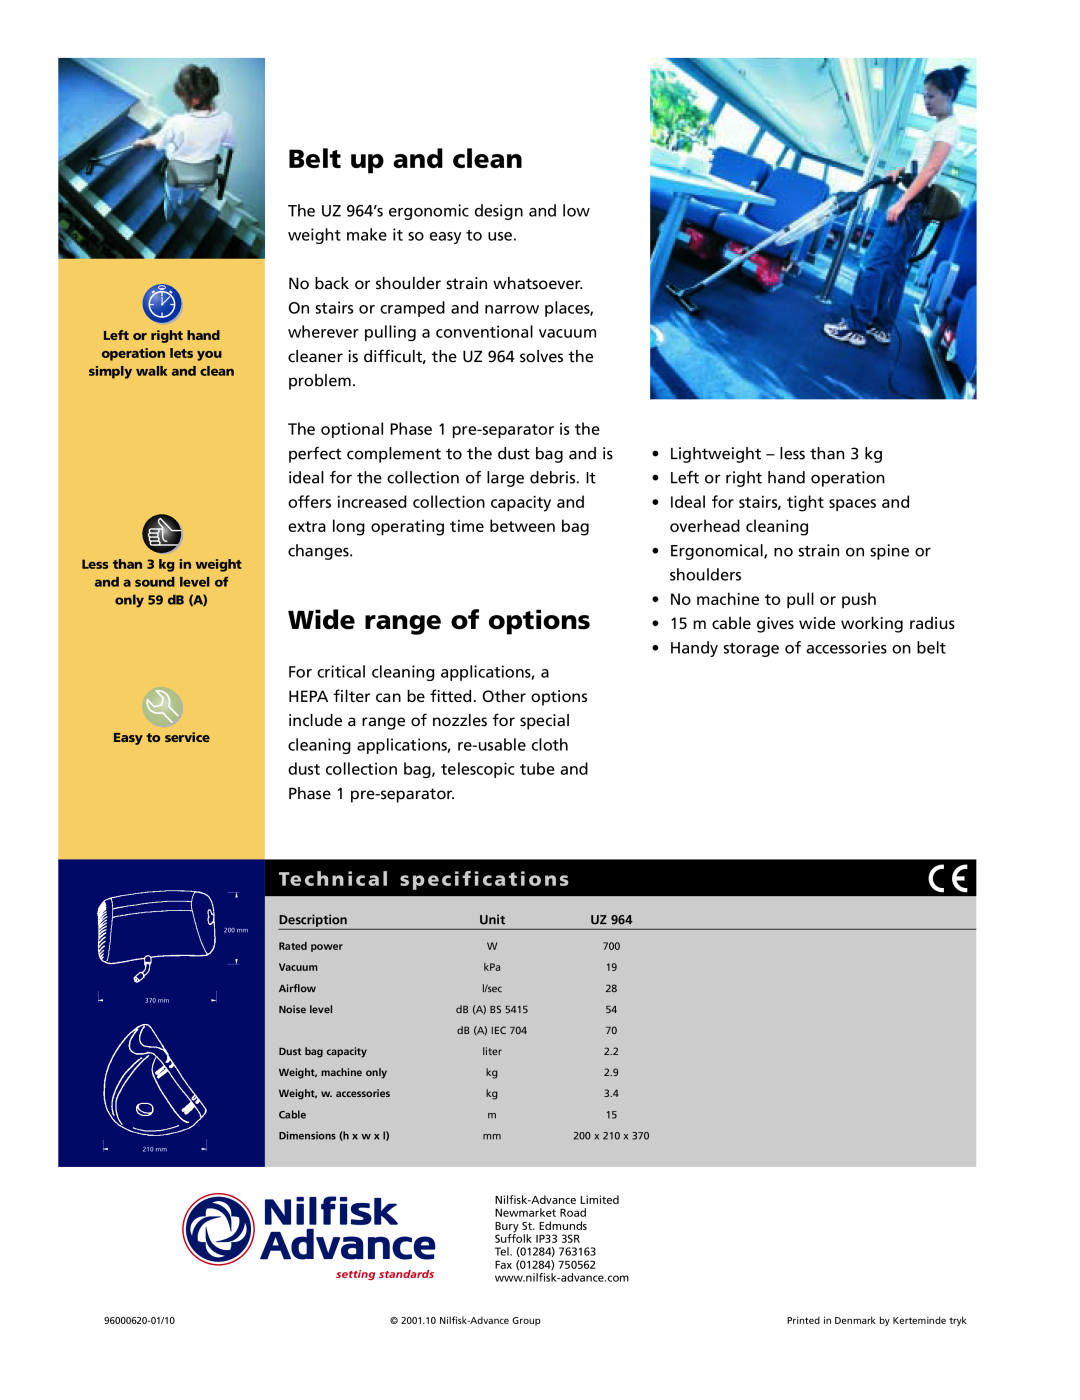 Nilfisk-Advance America UZ 964 manual Belt up and clean, Wide range of options, Technical specifications 